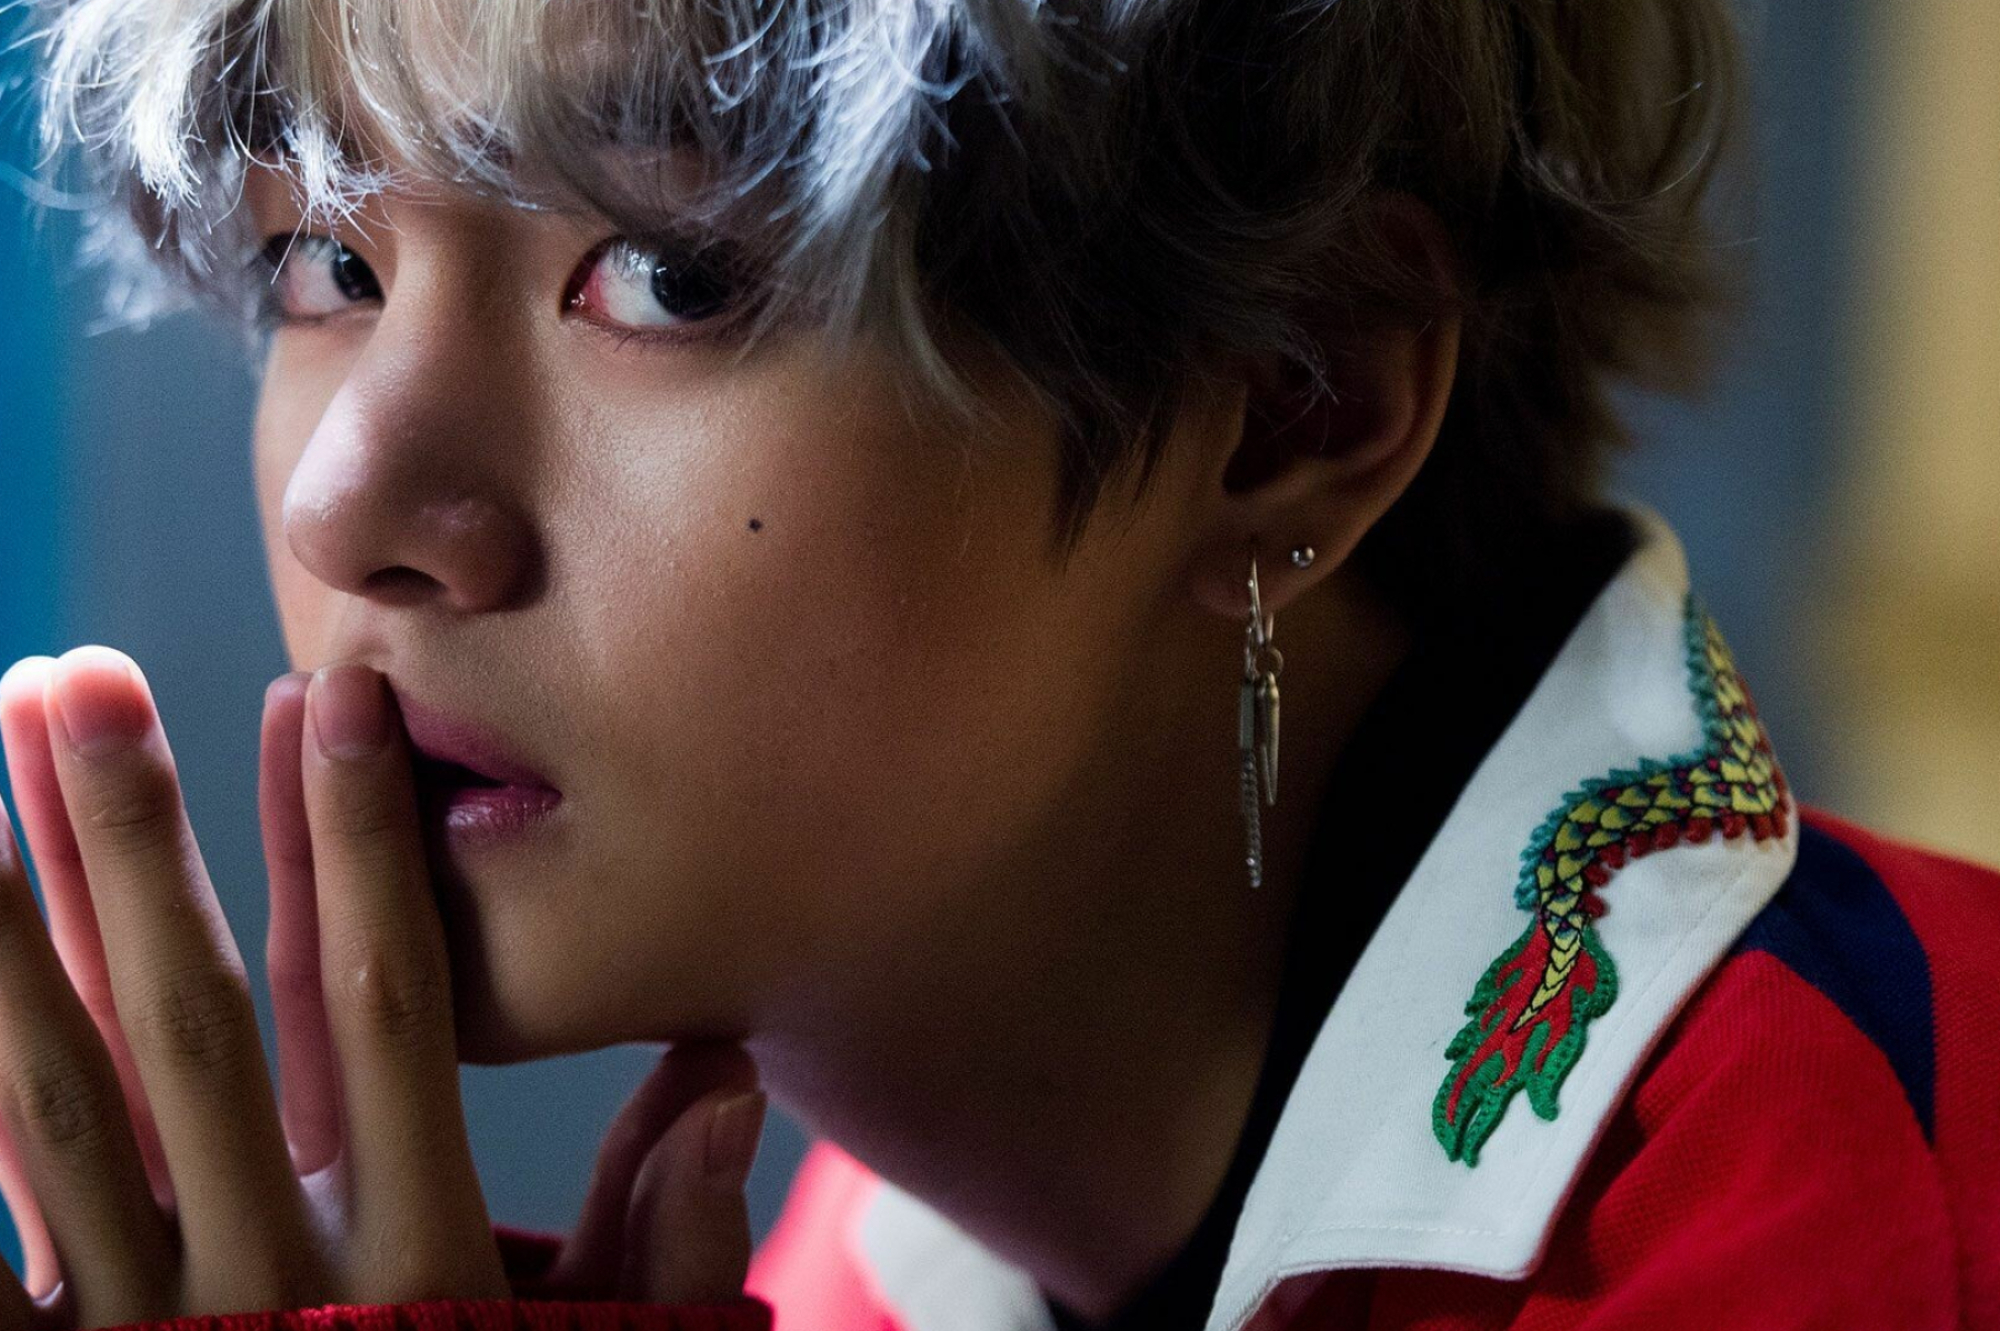 V (BTS): Released his first independent song, "Scenery", on January 30, 2019, through the Bangtan Boys' SoundCloud page. 2000x1340 HD Wallpaper.